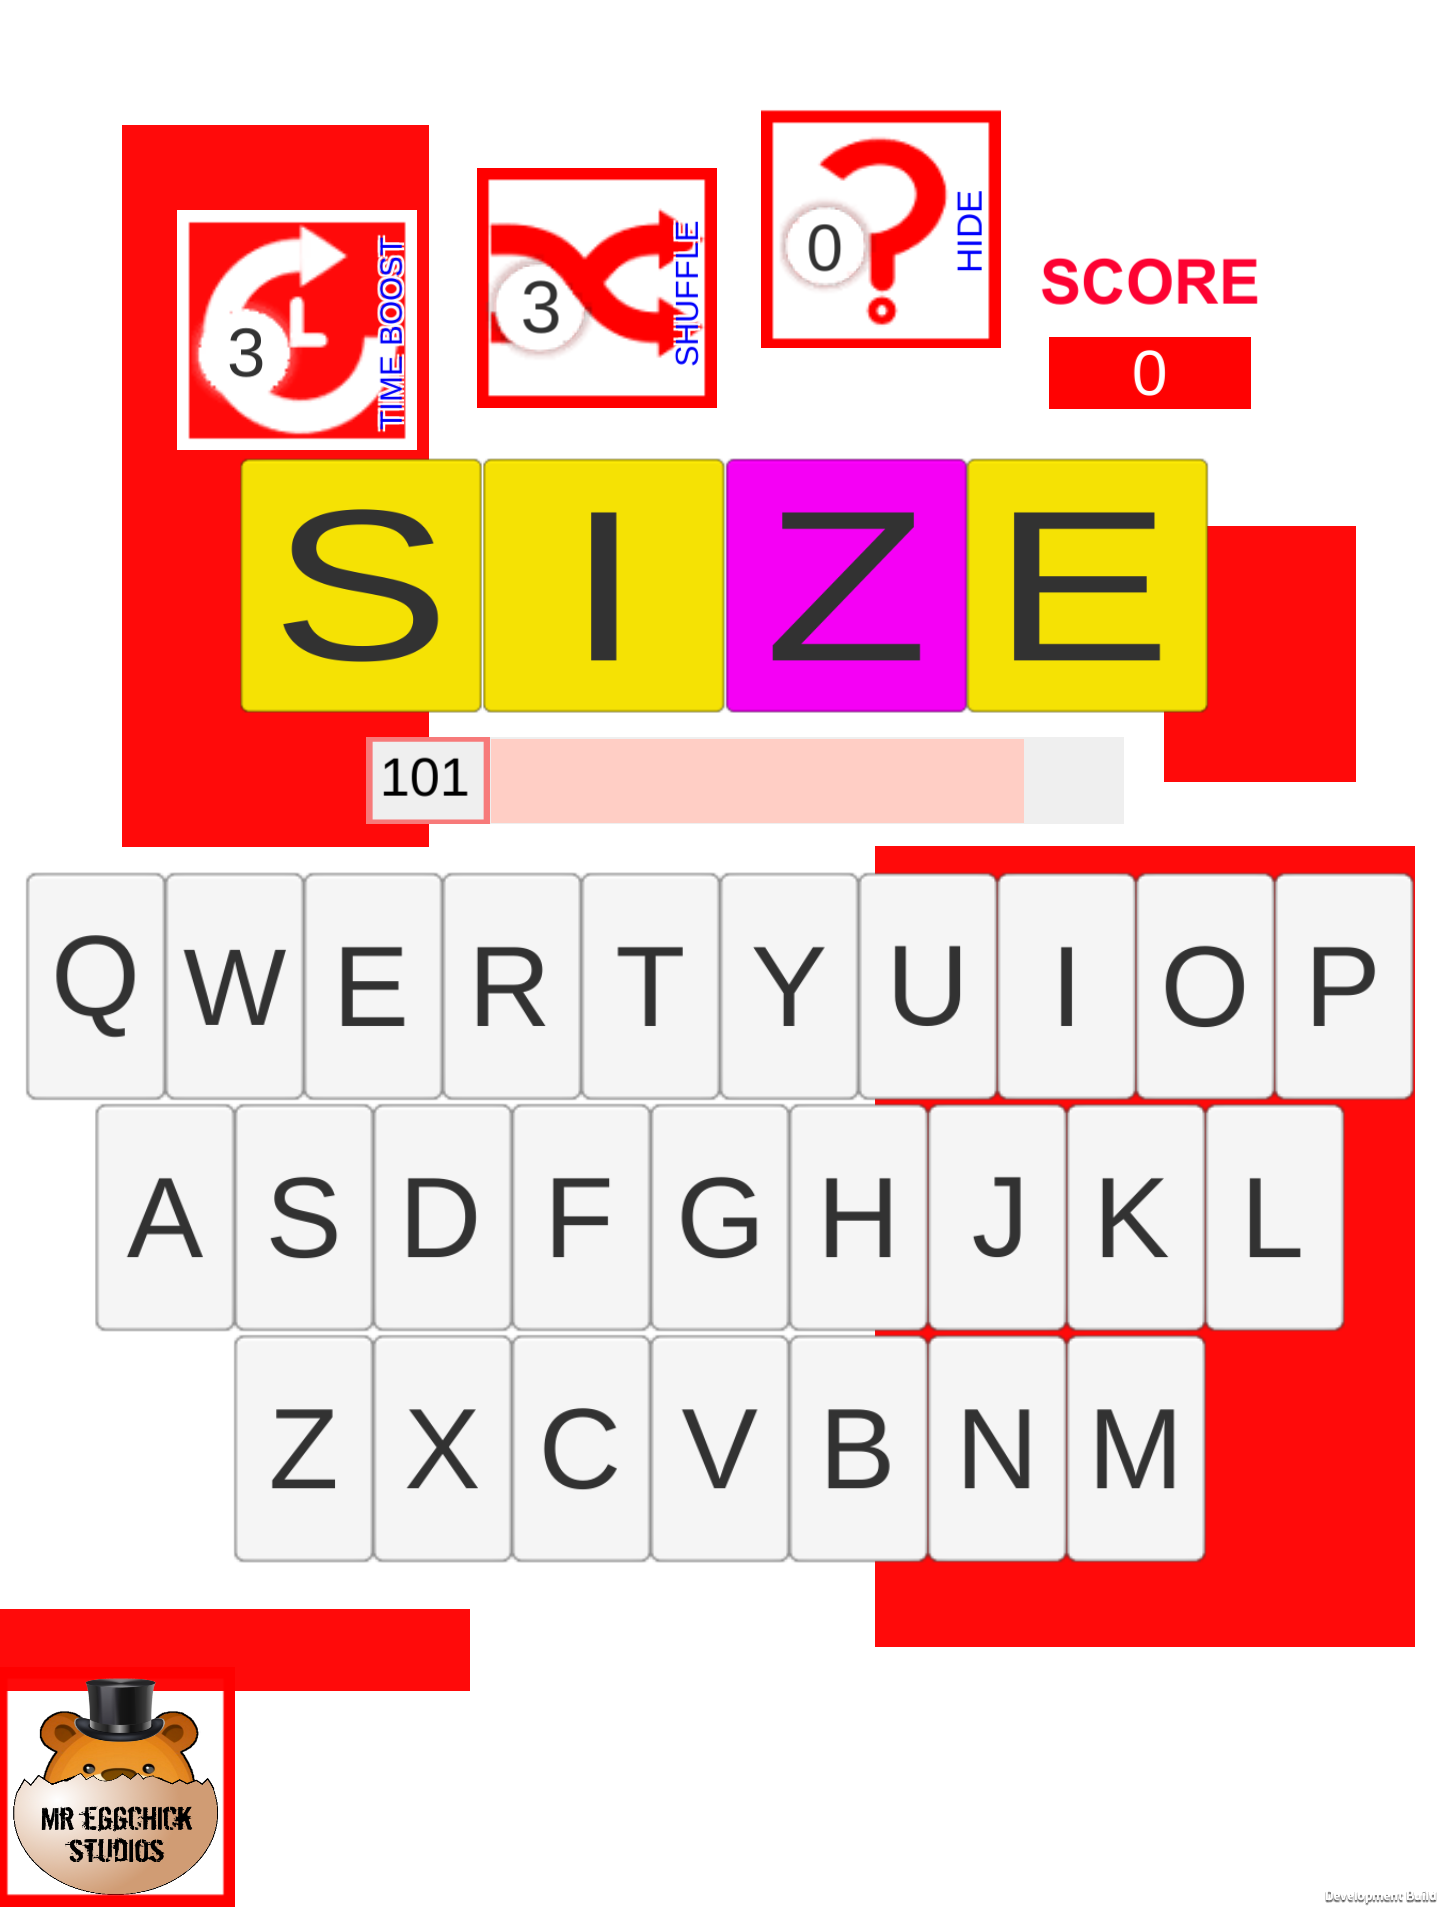 Select the letter Z from the board